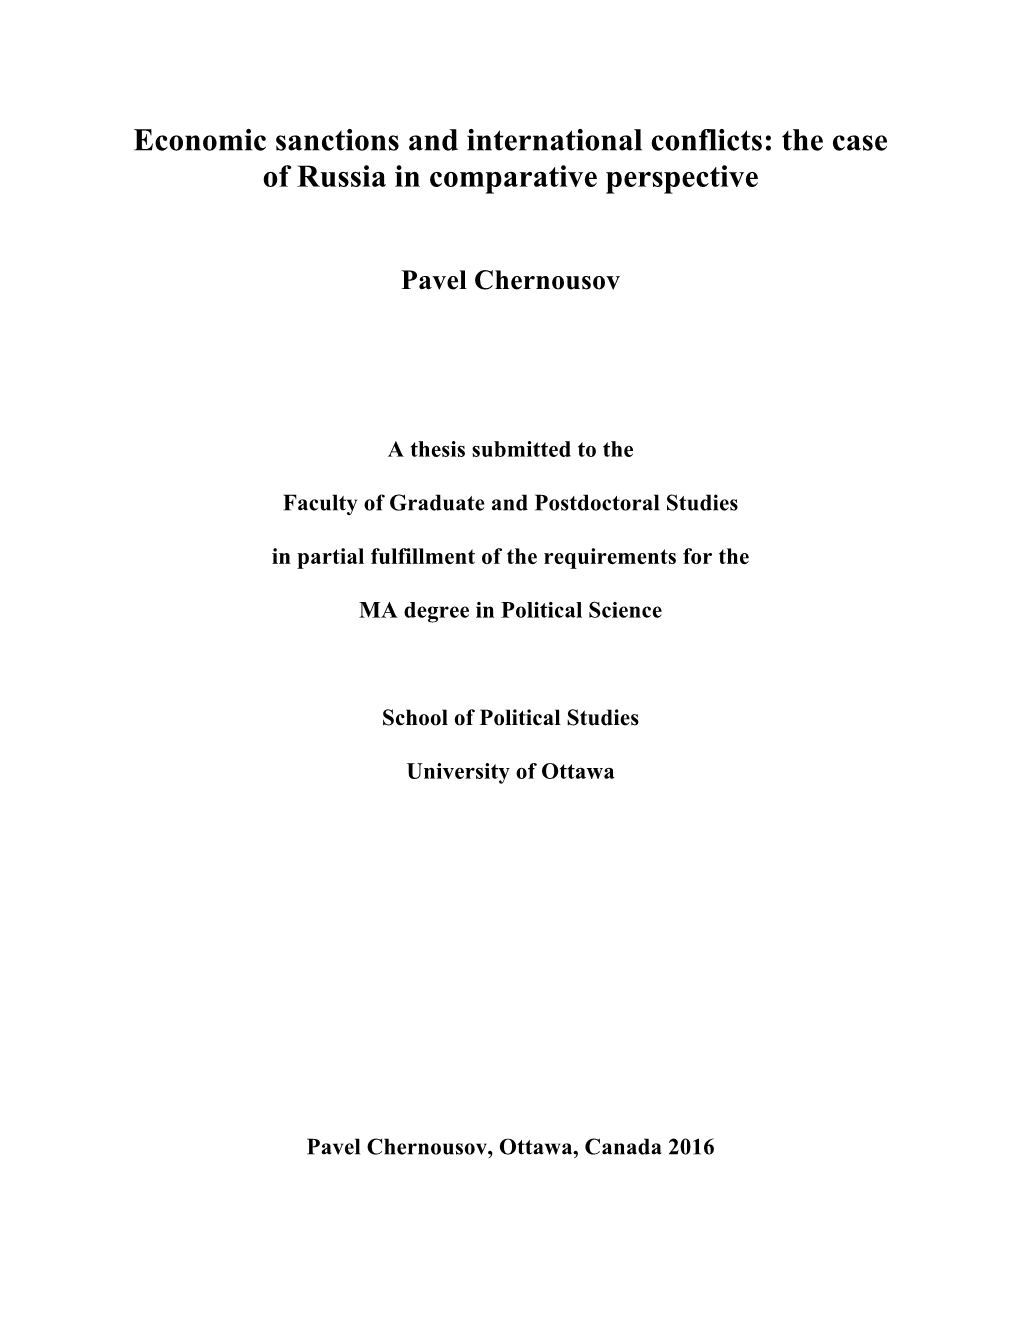 Economic Sanctions and International Conflicts: the Case of Russia in Comparative Perspective